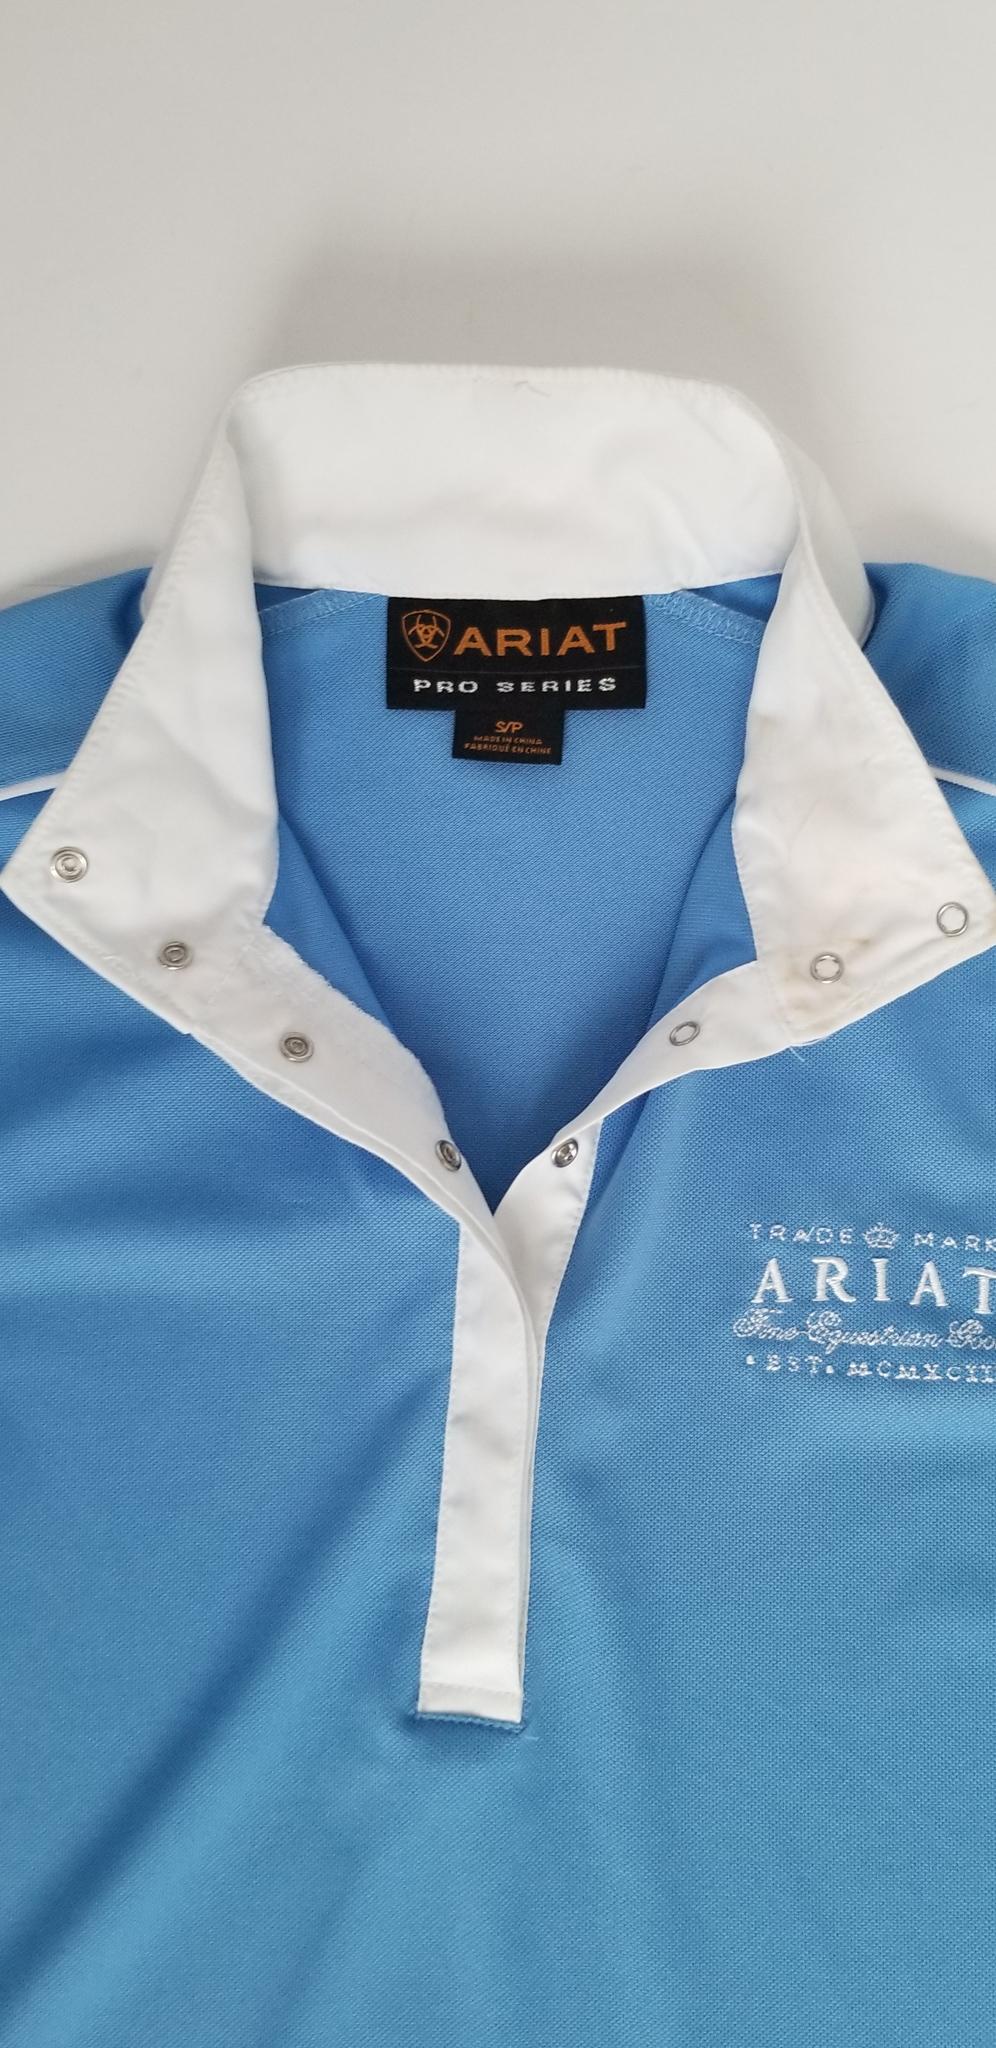 Ariat Pro Series Competition Shirt - Blue and White - Women's Small